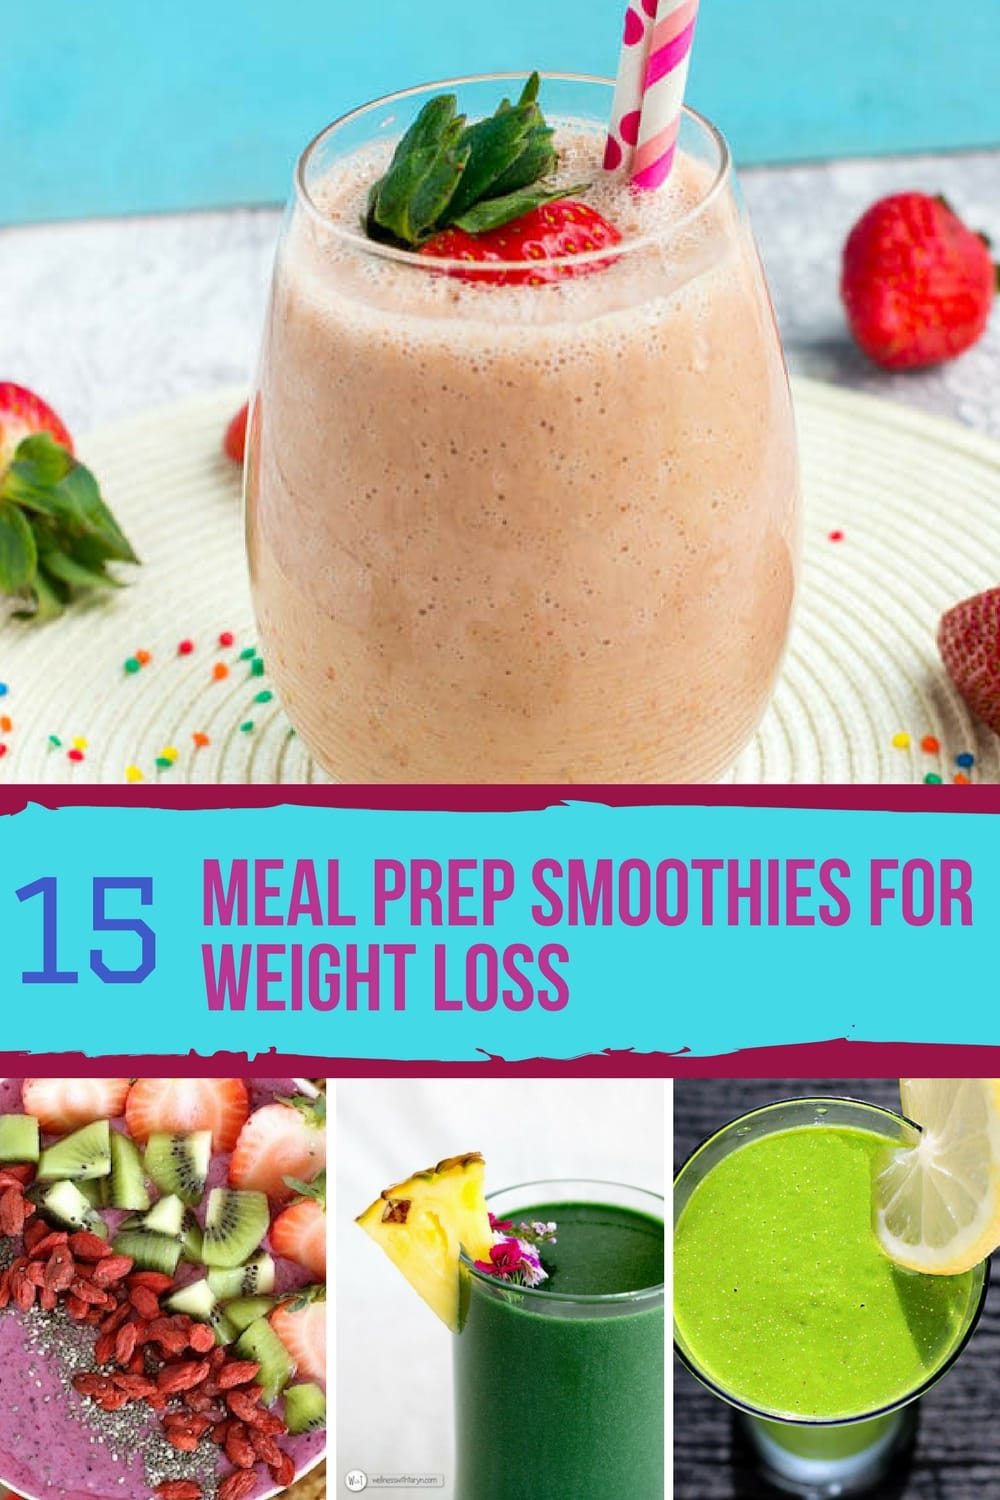 15 Meal Prep Smoothies for Weight Loss